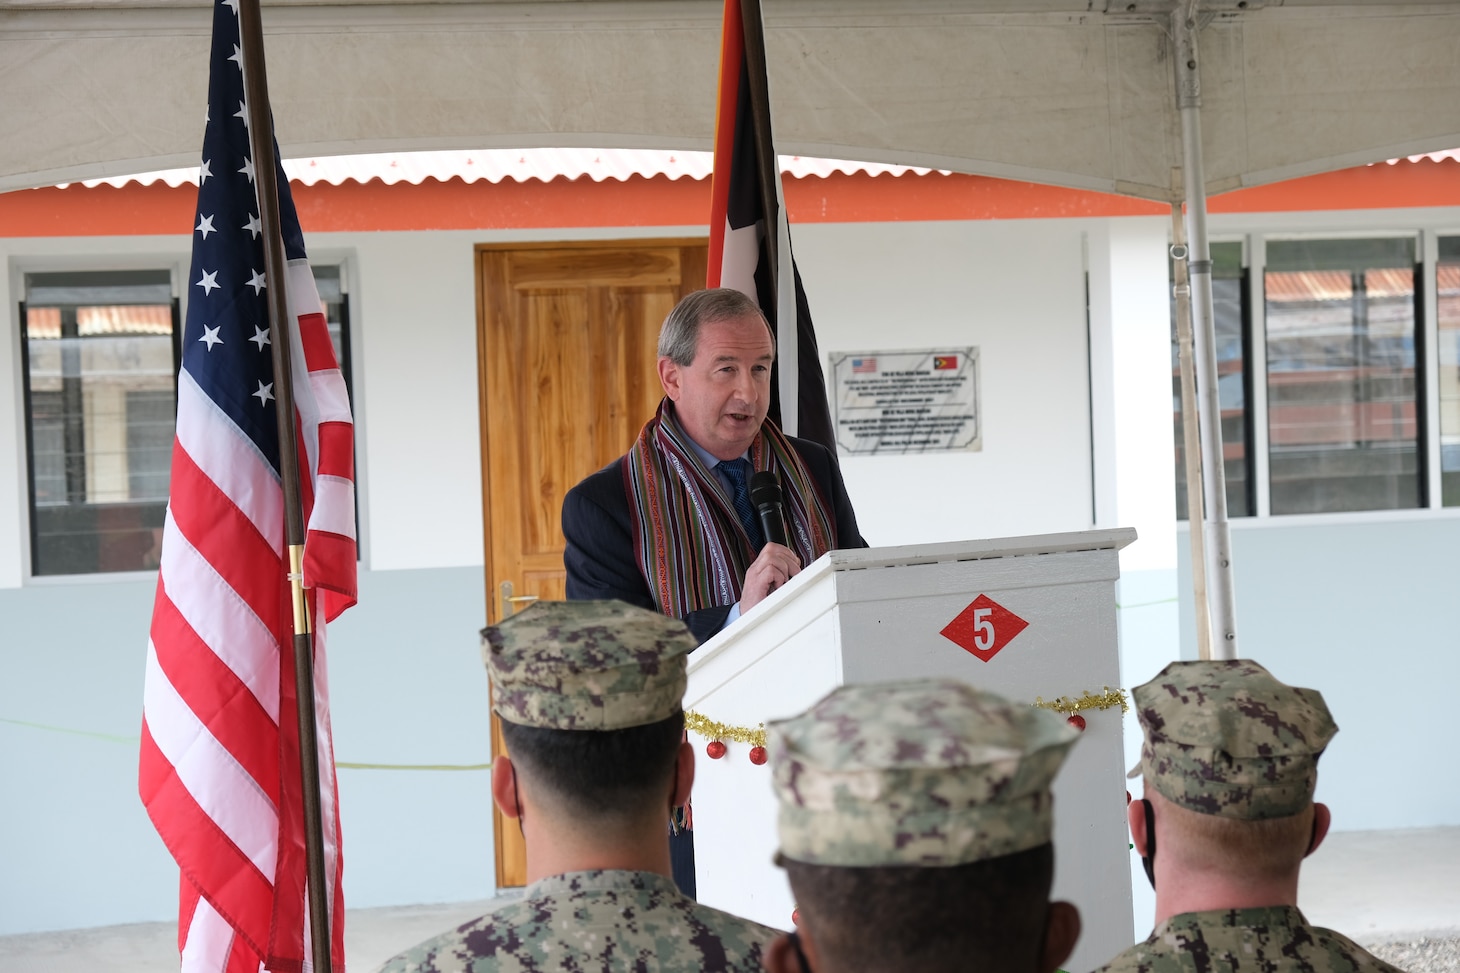 BAUCAU, Timor-Leste (Dec. 10, 2021) Thomas Daley, U.S. Embassy Chargé d’Affairs, speaks to U.S. Navy Seabees with Naval Mobile Construction Battalion (NMCB) 5, the Falintil-Forcas Defensa Timor Leste, and other ministry of education personnel at the ribbon-cutting ceremony of a four-room schoolhouse in Baucau, Timor-Leste. NMCB-5 is deployed to the U.S. 7th Fleet area of operations, supporting a free and open Indo-Pacific, strengthening their alliances and partnerships, and providing general engineering and civil support to joint operational forces. Homeported out of Port Hueneme, California, NMCB-5 has 13 detail sites deployed throughout the U.S. and Indo-Pacific area of operations.